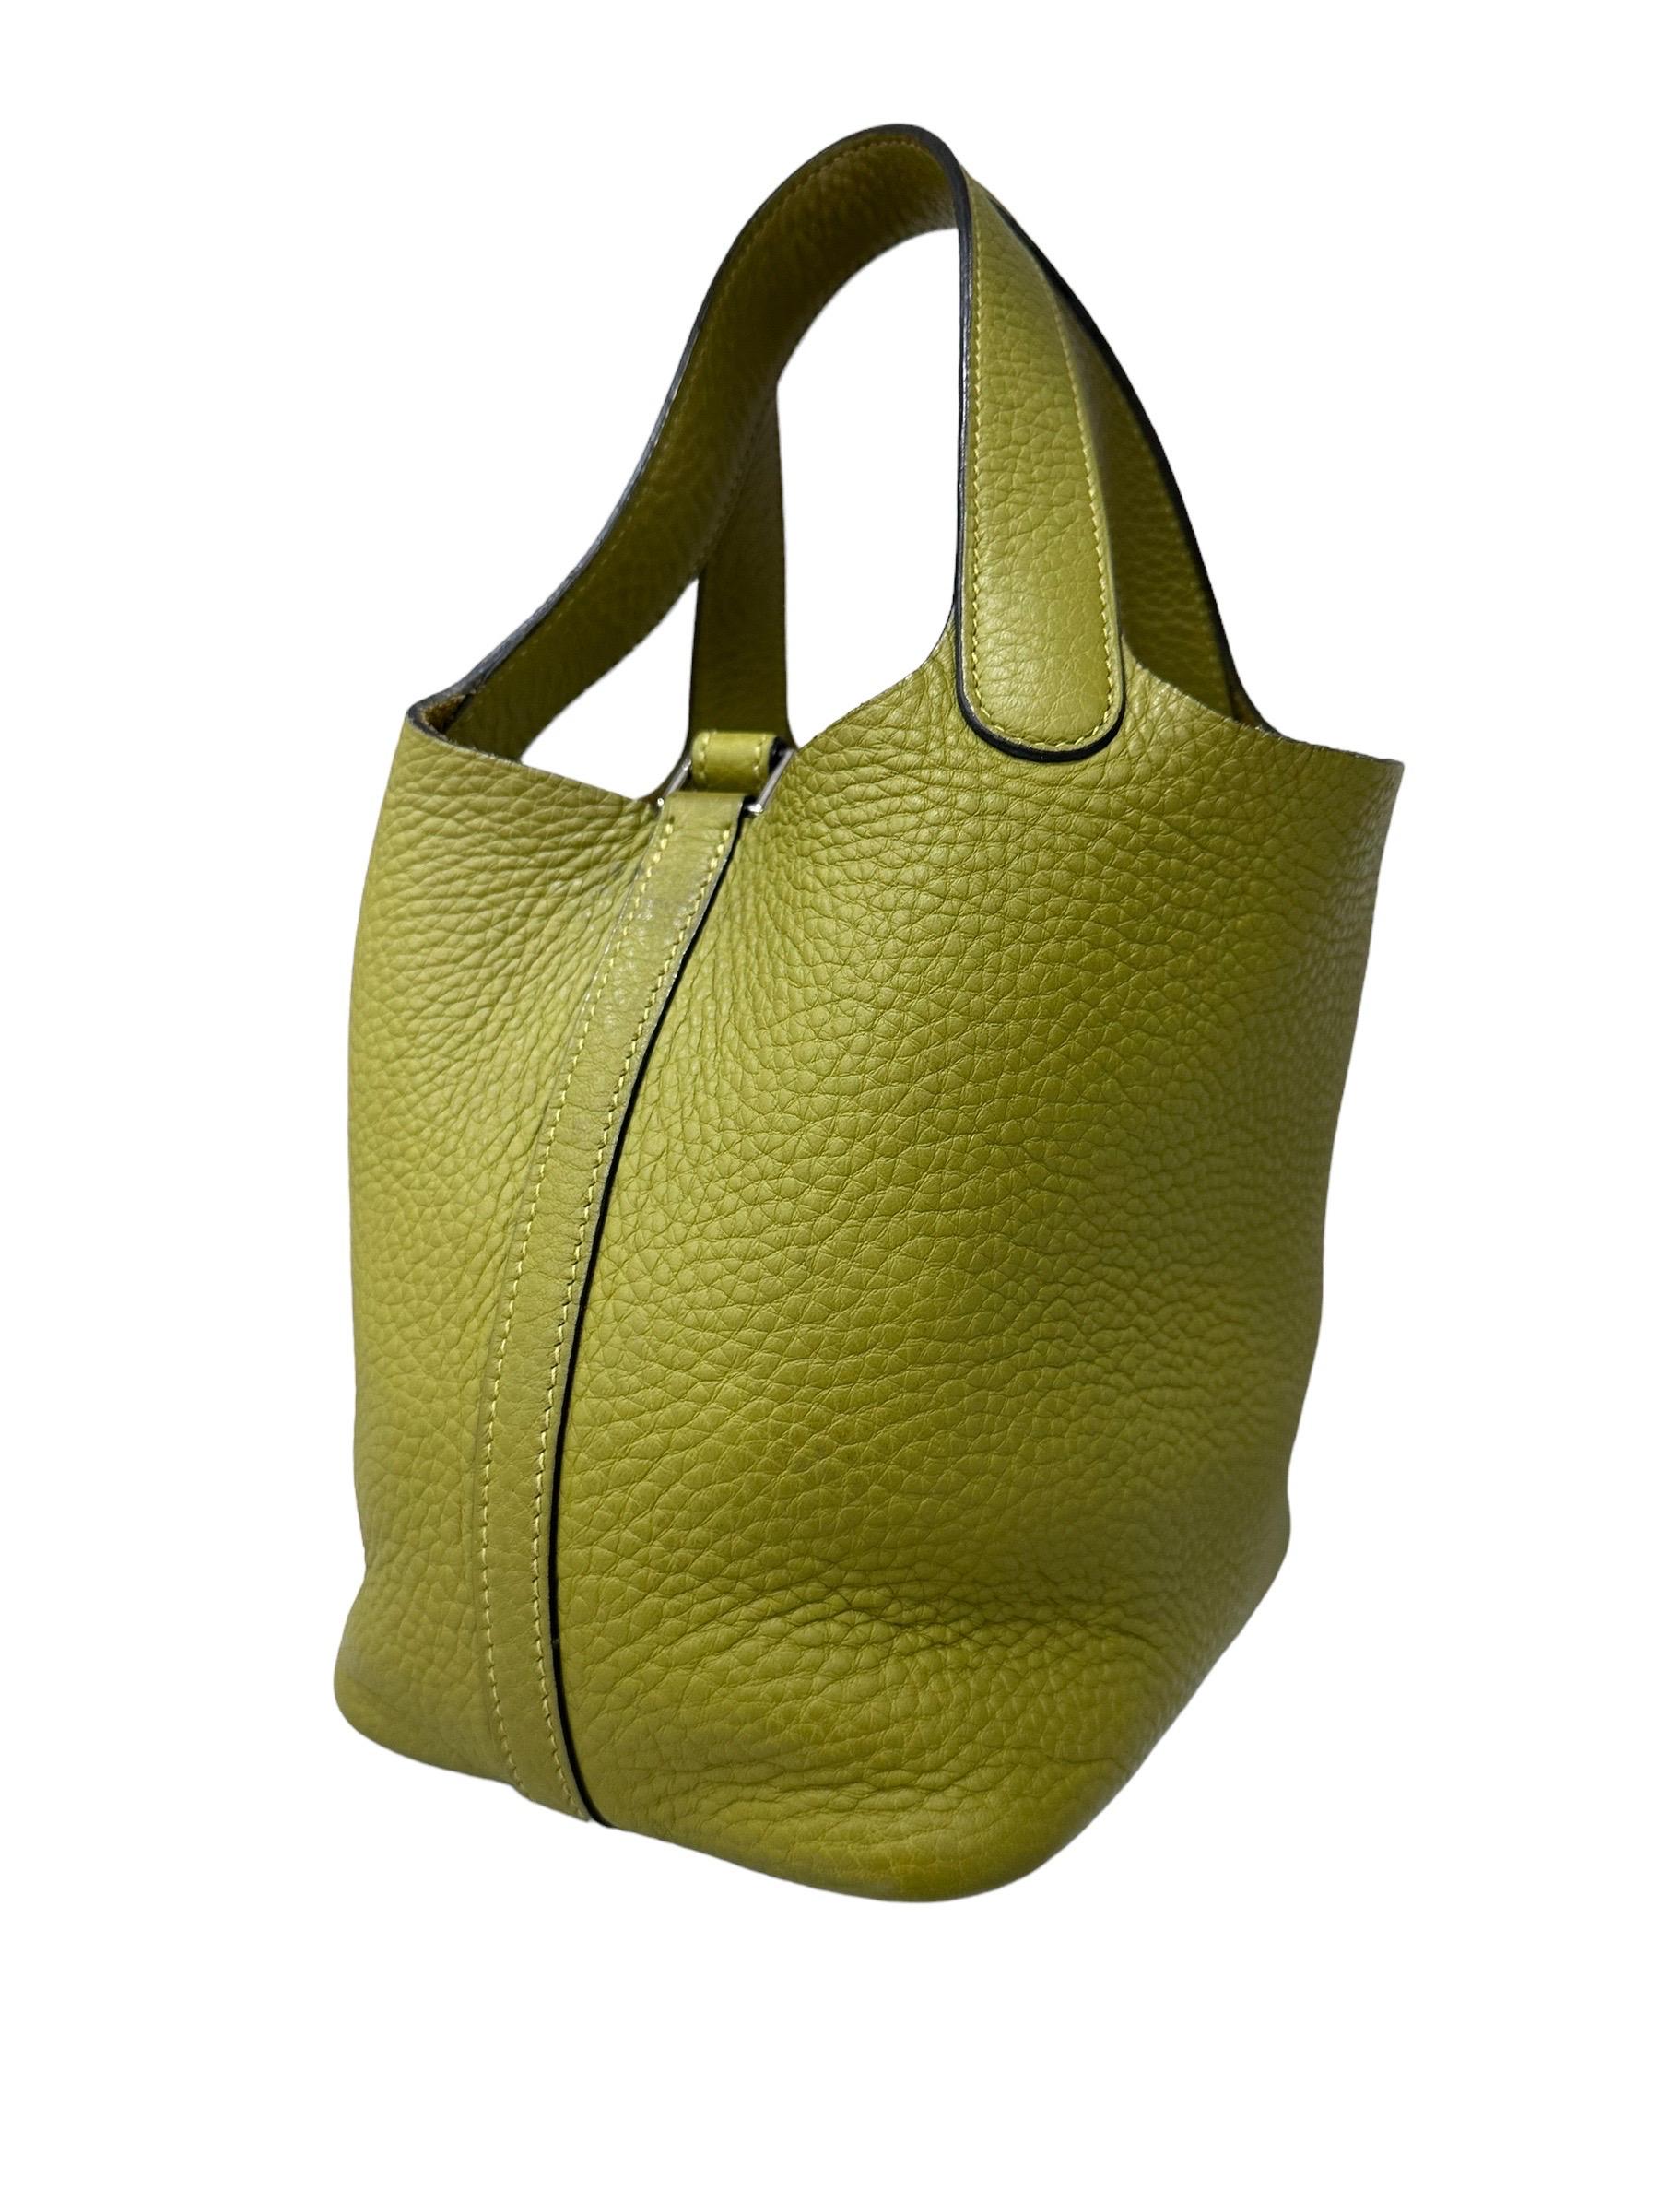 Hermès Picotin 18 Cleamence Leather Vert Anis Top Handle Bag For Sale 1